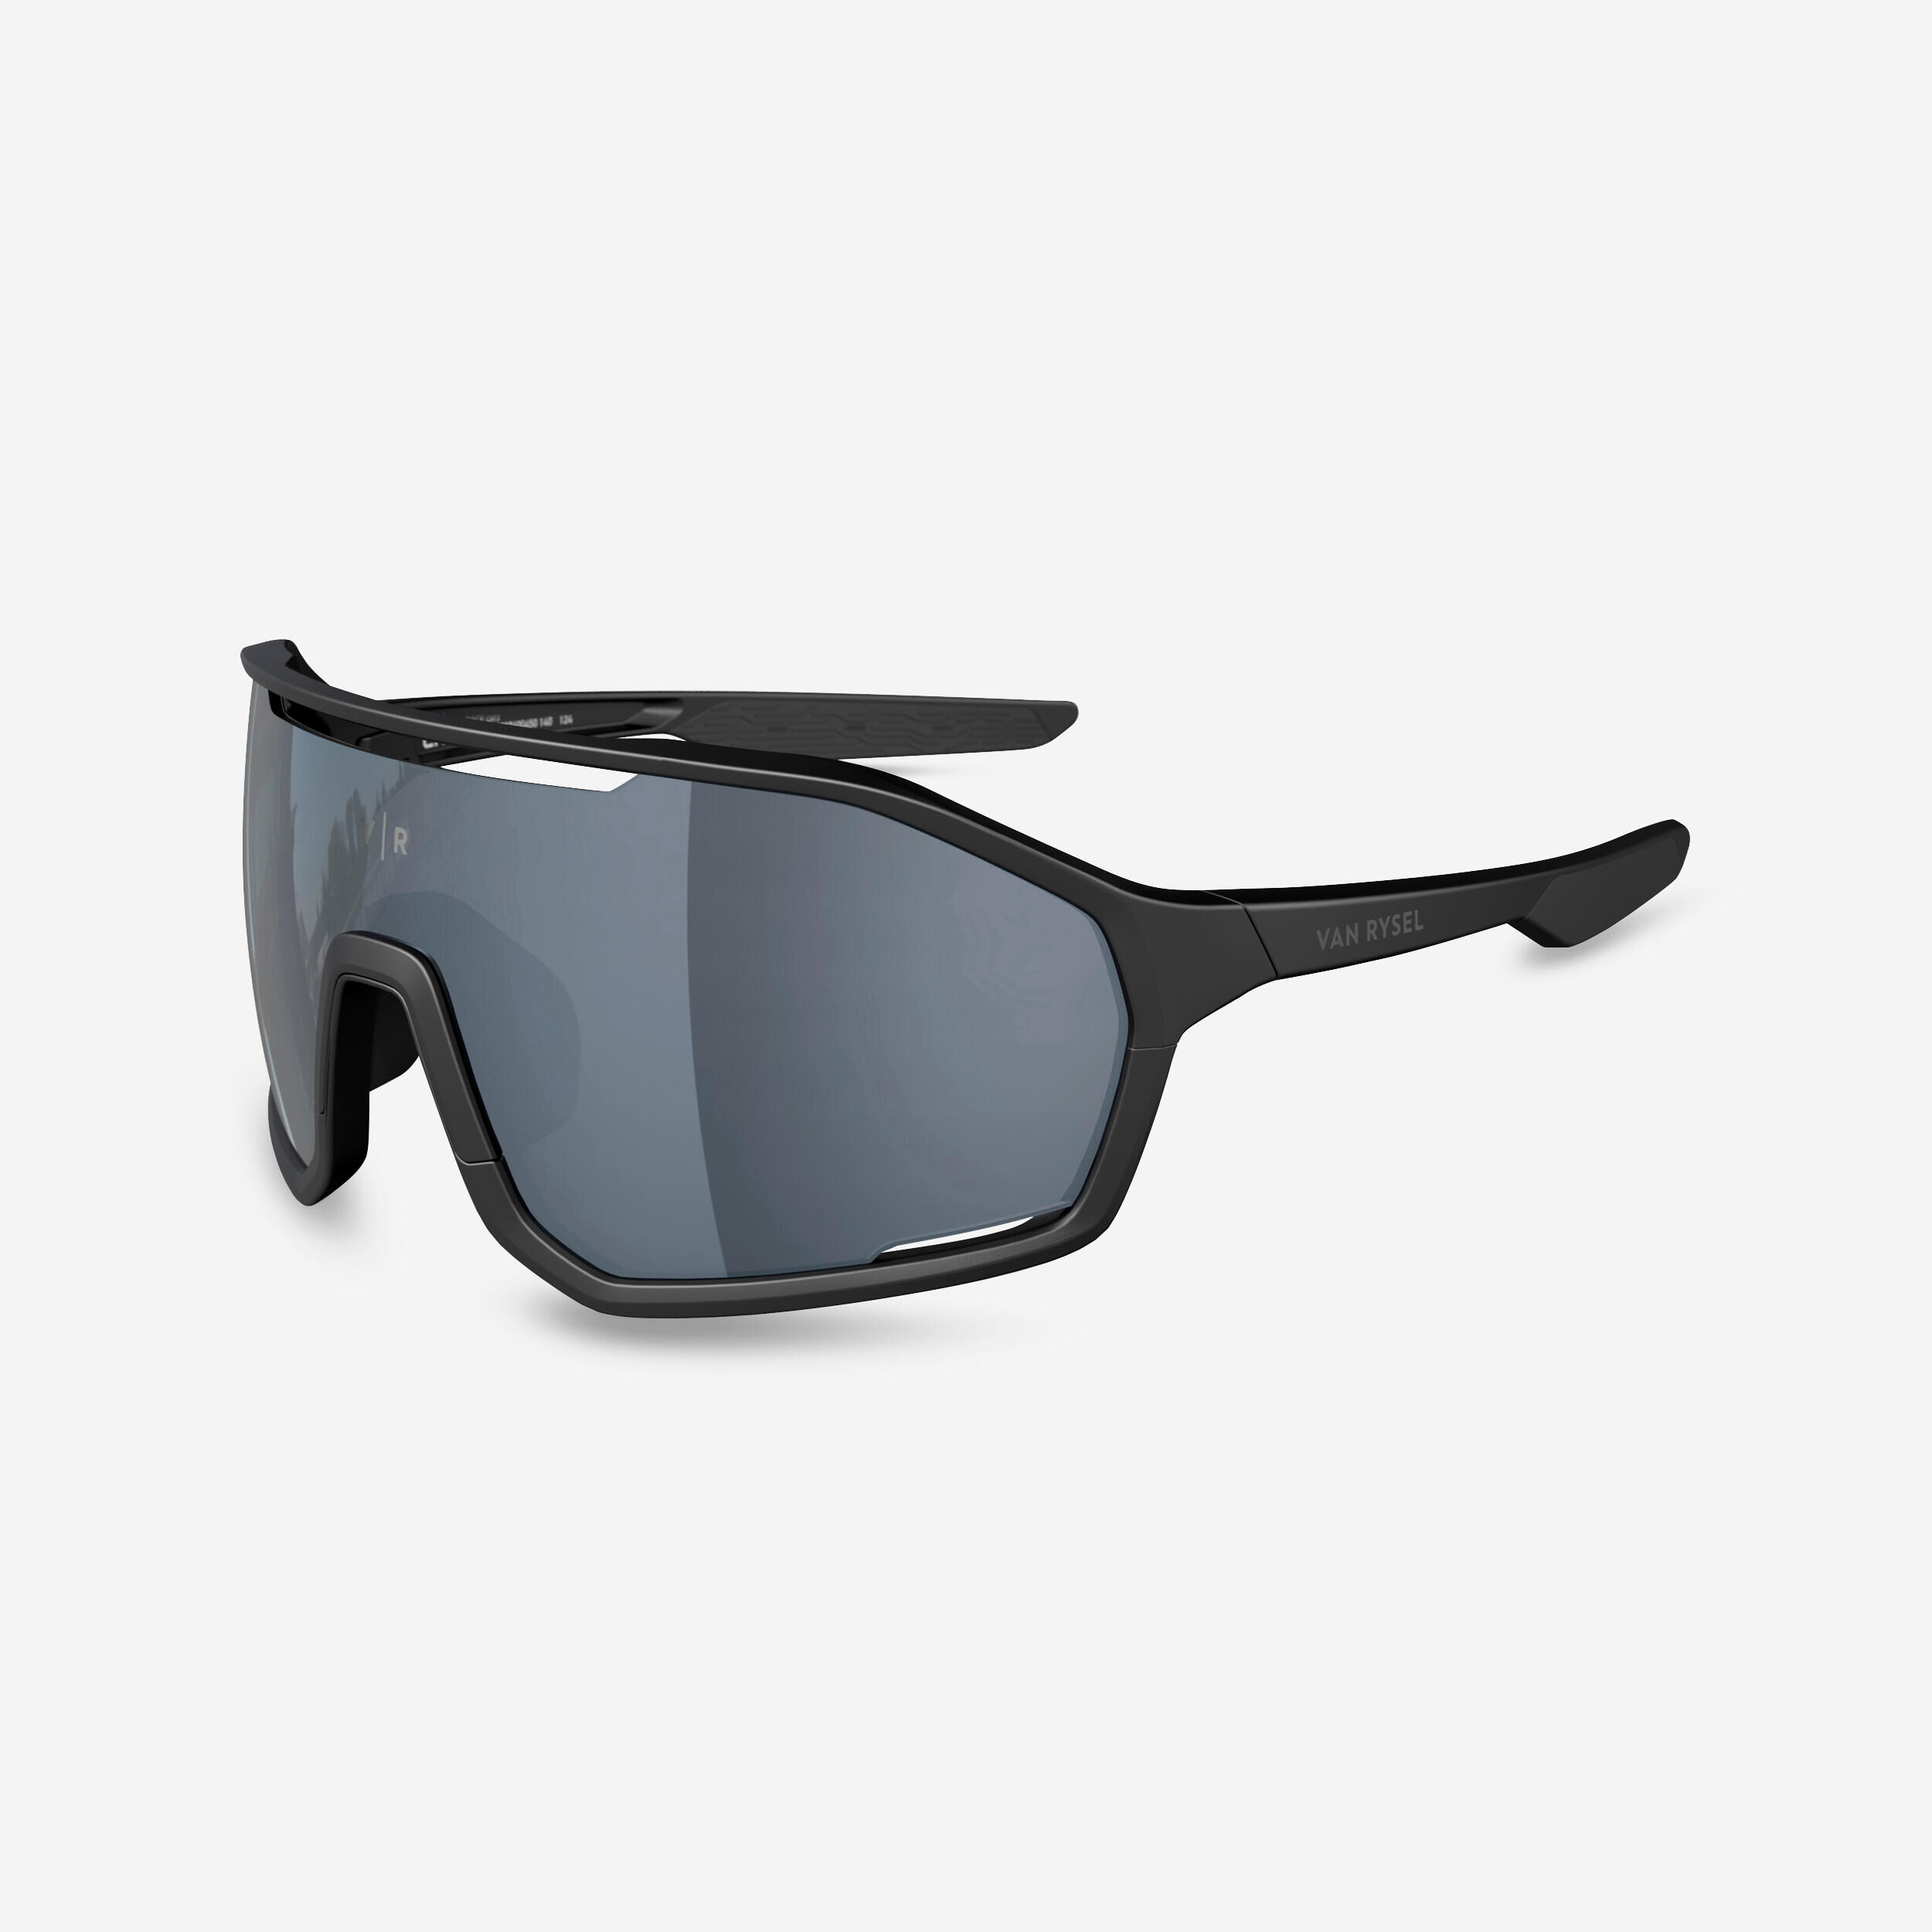 ROCKRIDER Adult Category 3 Cycling Sunglasses Perf 500 - Black